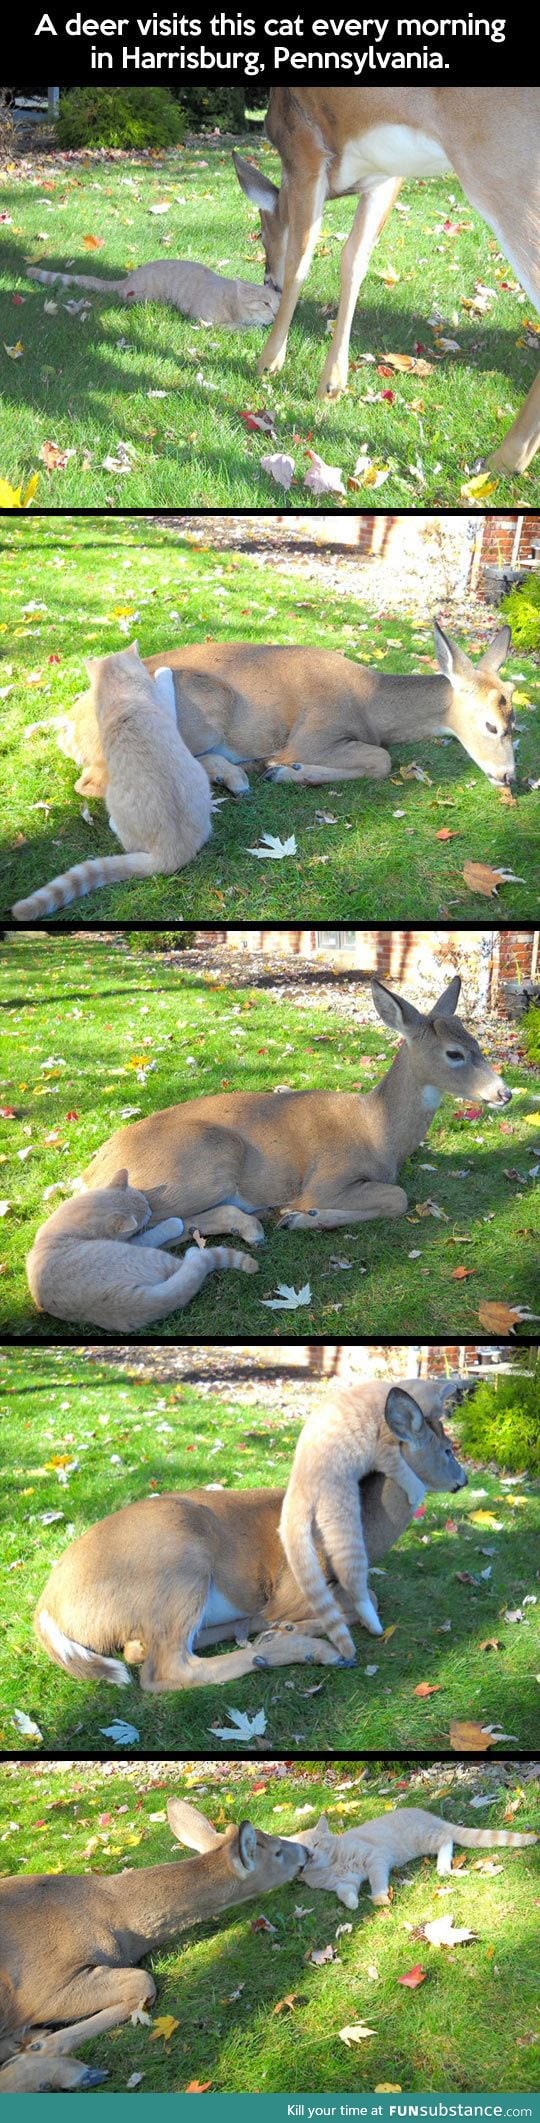 Deer and cat are morning friends